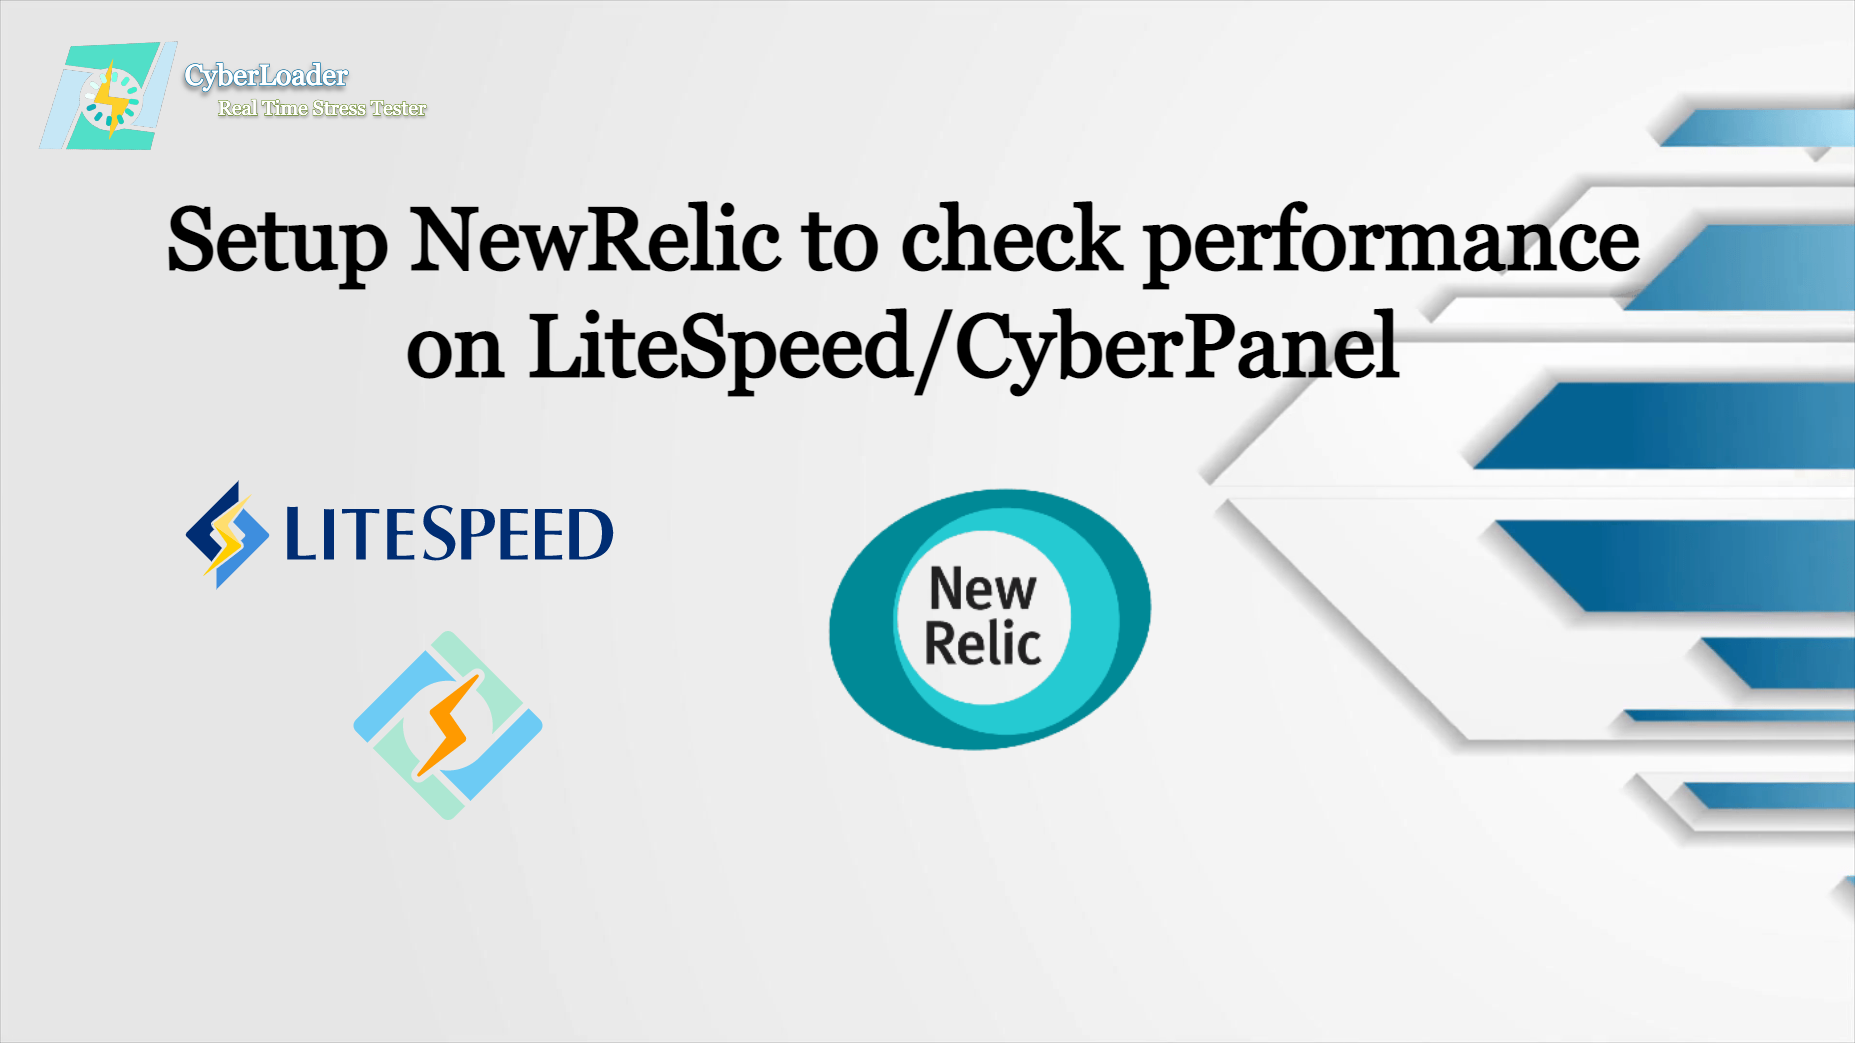 You are currently viewing Setup NewRelic on LiteSpeed/CyberPanel to check Web Application Performance